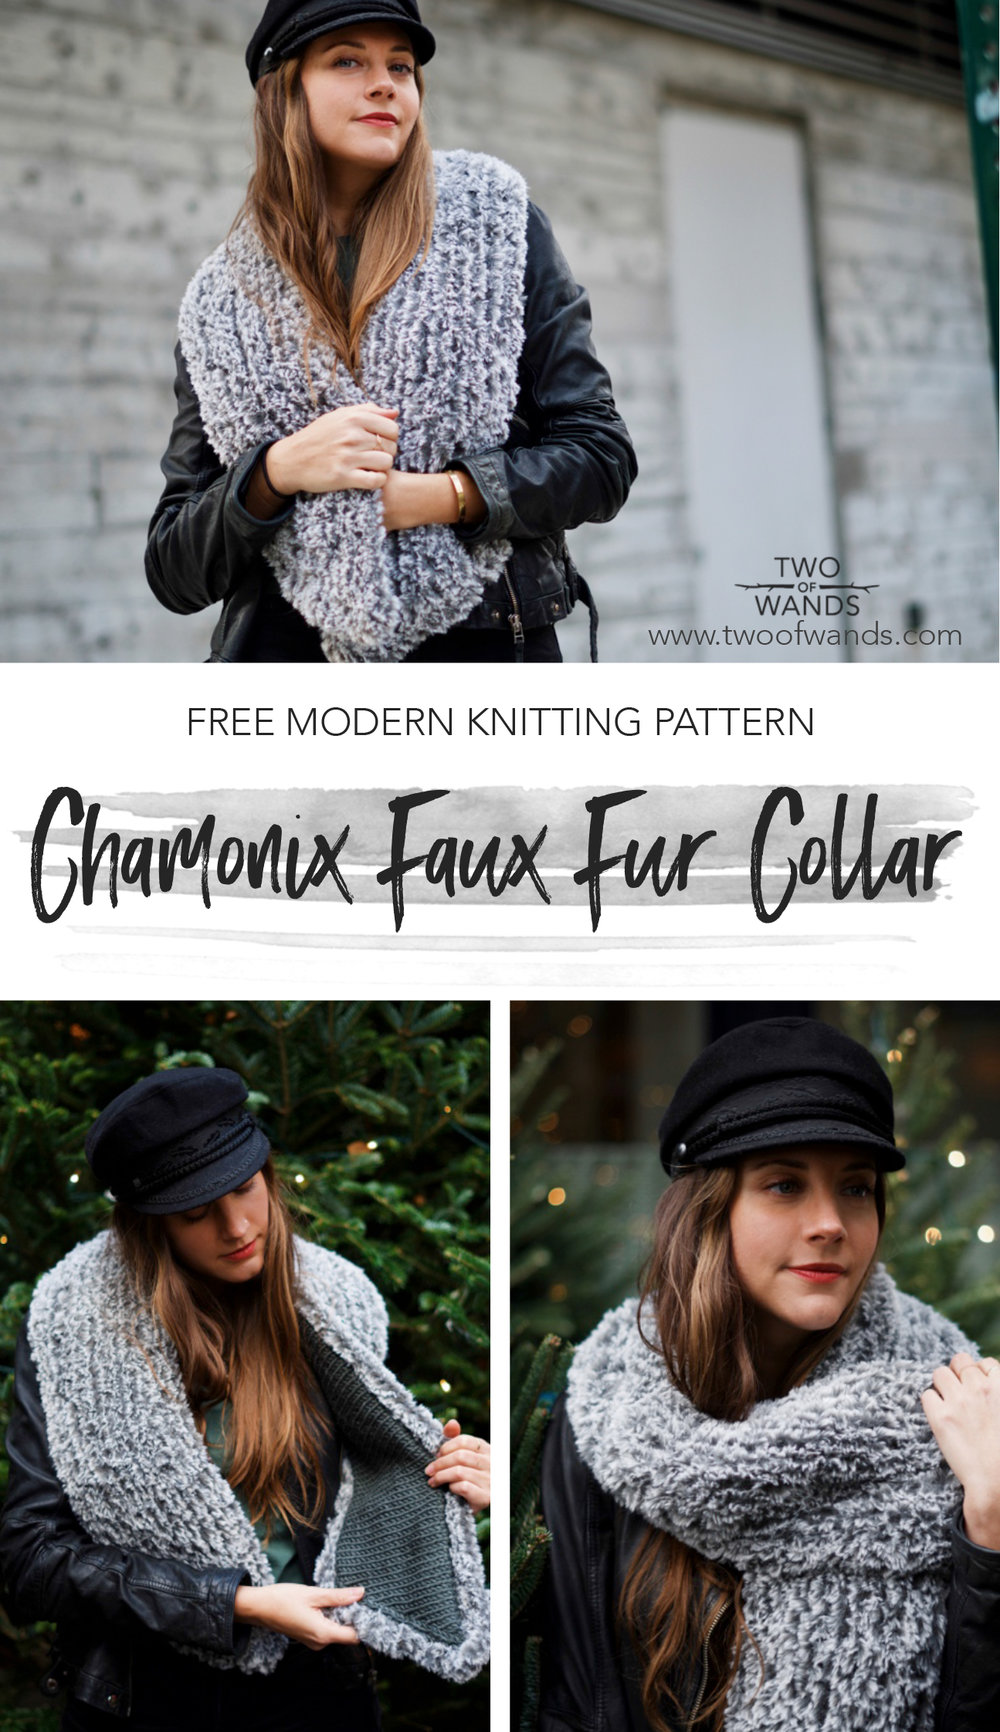 Chamonix Faux Fur Collar pattern by Two of Wands